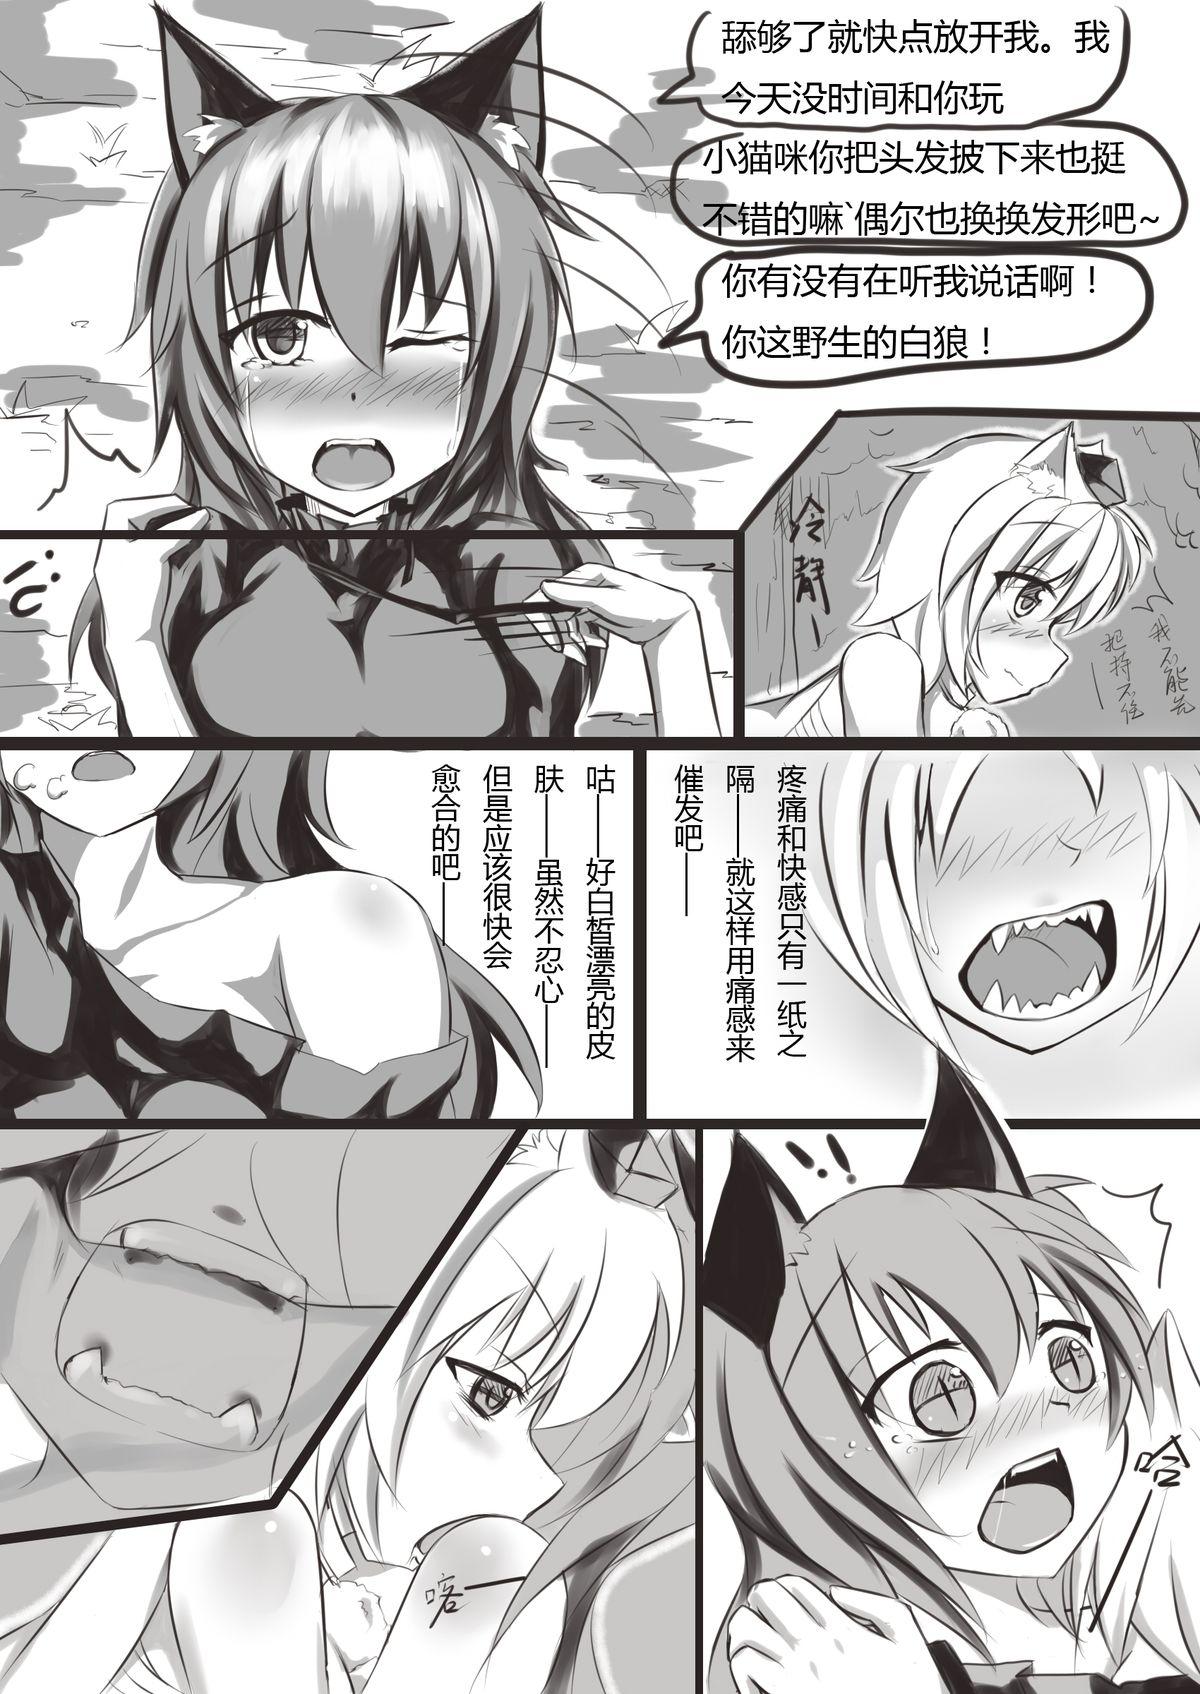 Hooker 白狼黑猫 - Touhou project Amateur - Page 5